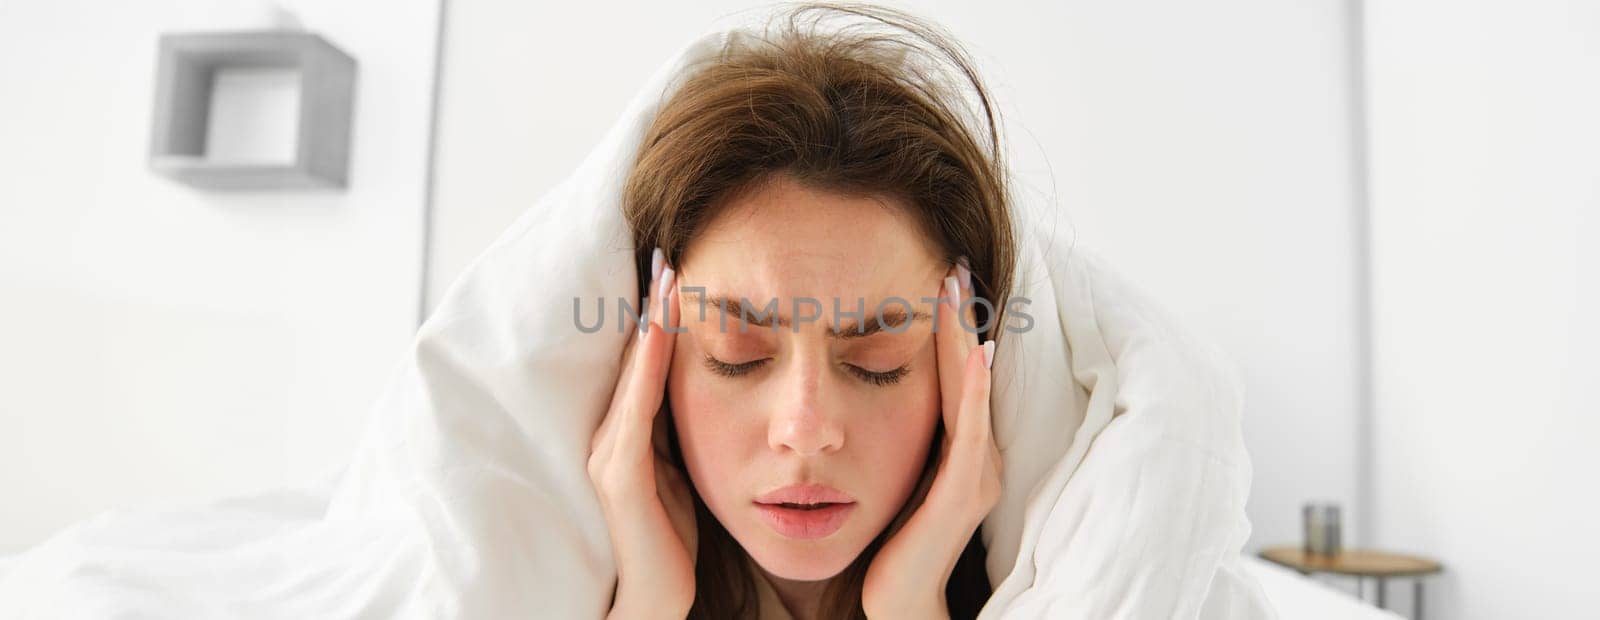 Close up of woman feeling unwell at home, lying in bed under white blankets and frowning, touching head, has headache, migraine, recovering from covid.